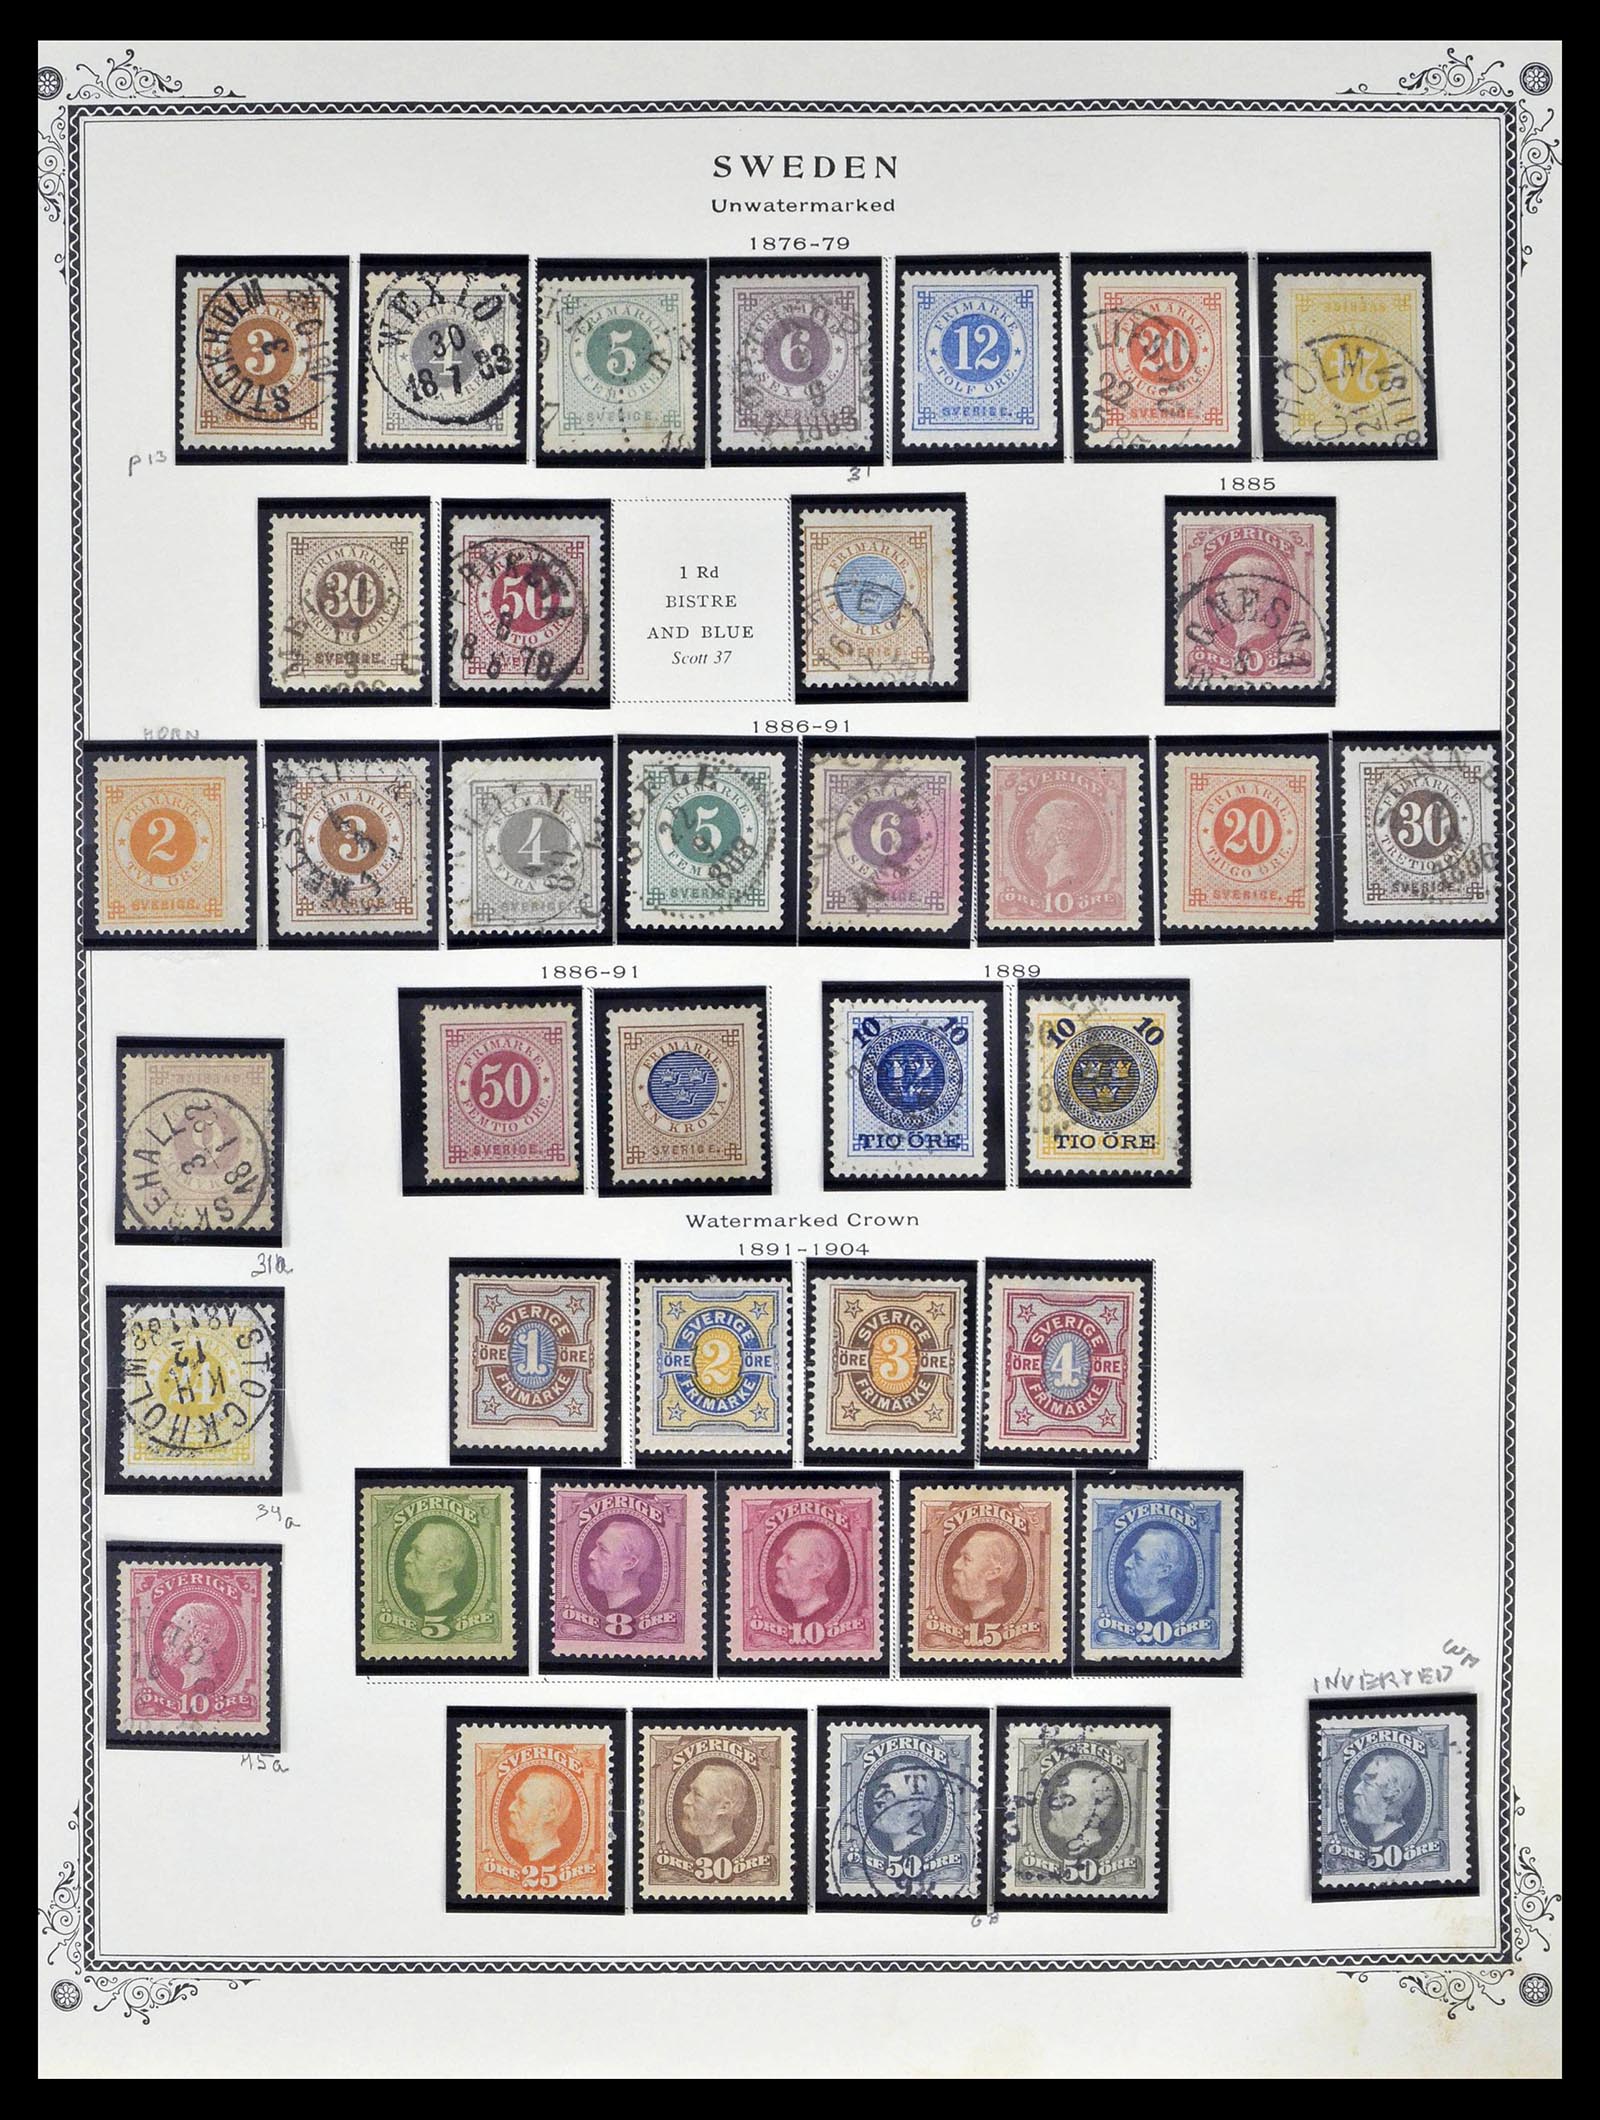 39179 0004 - Stamp collection 39179 Sweden 1855-1997.